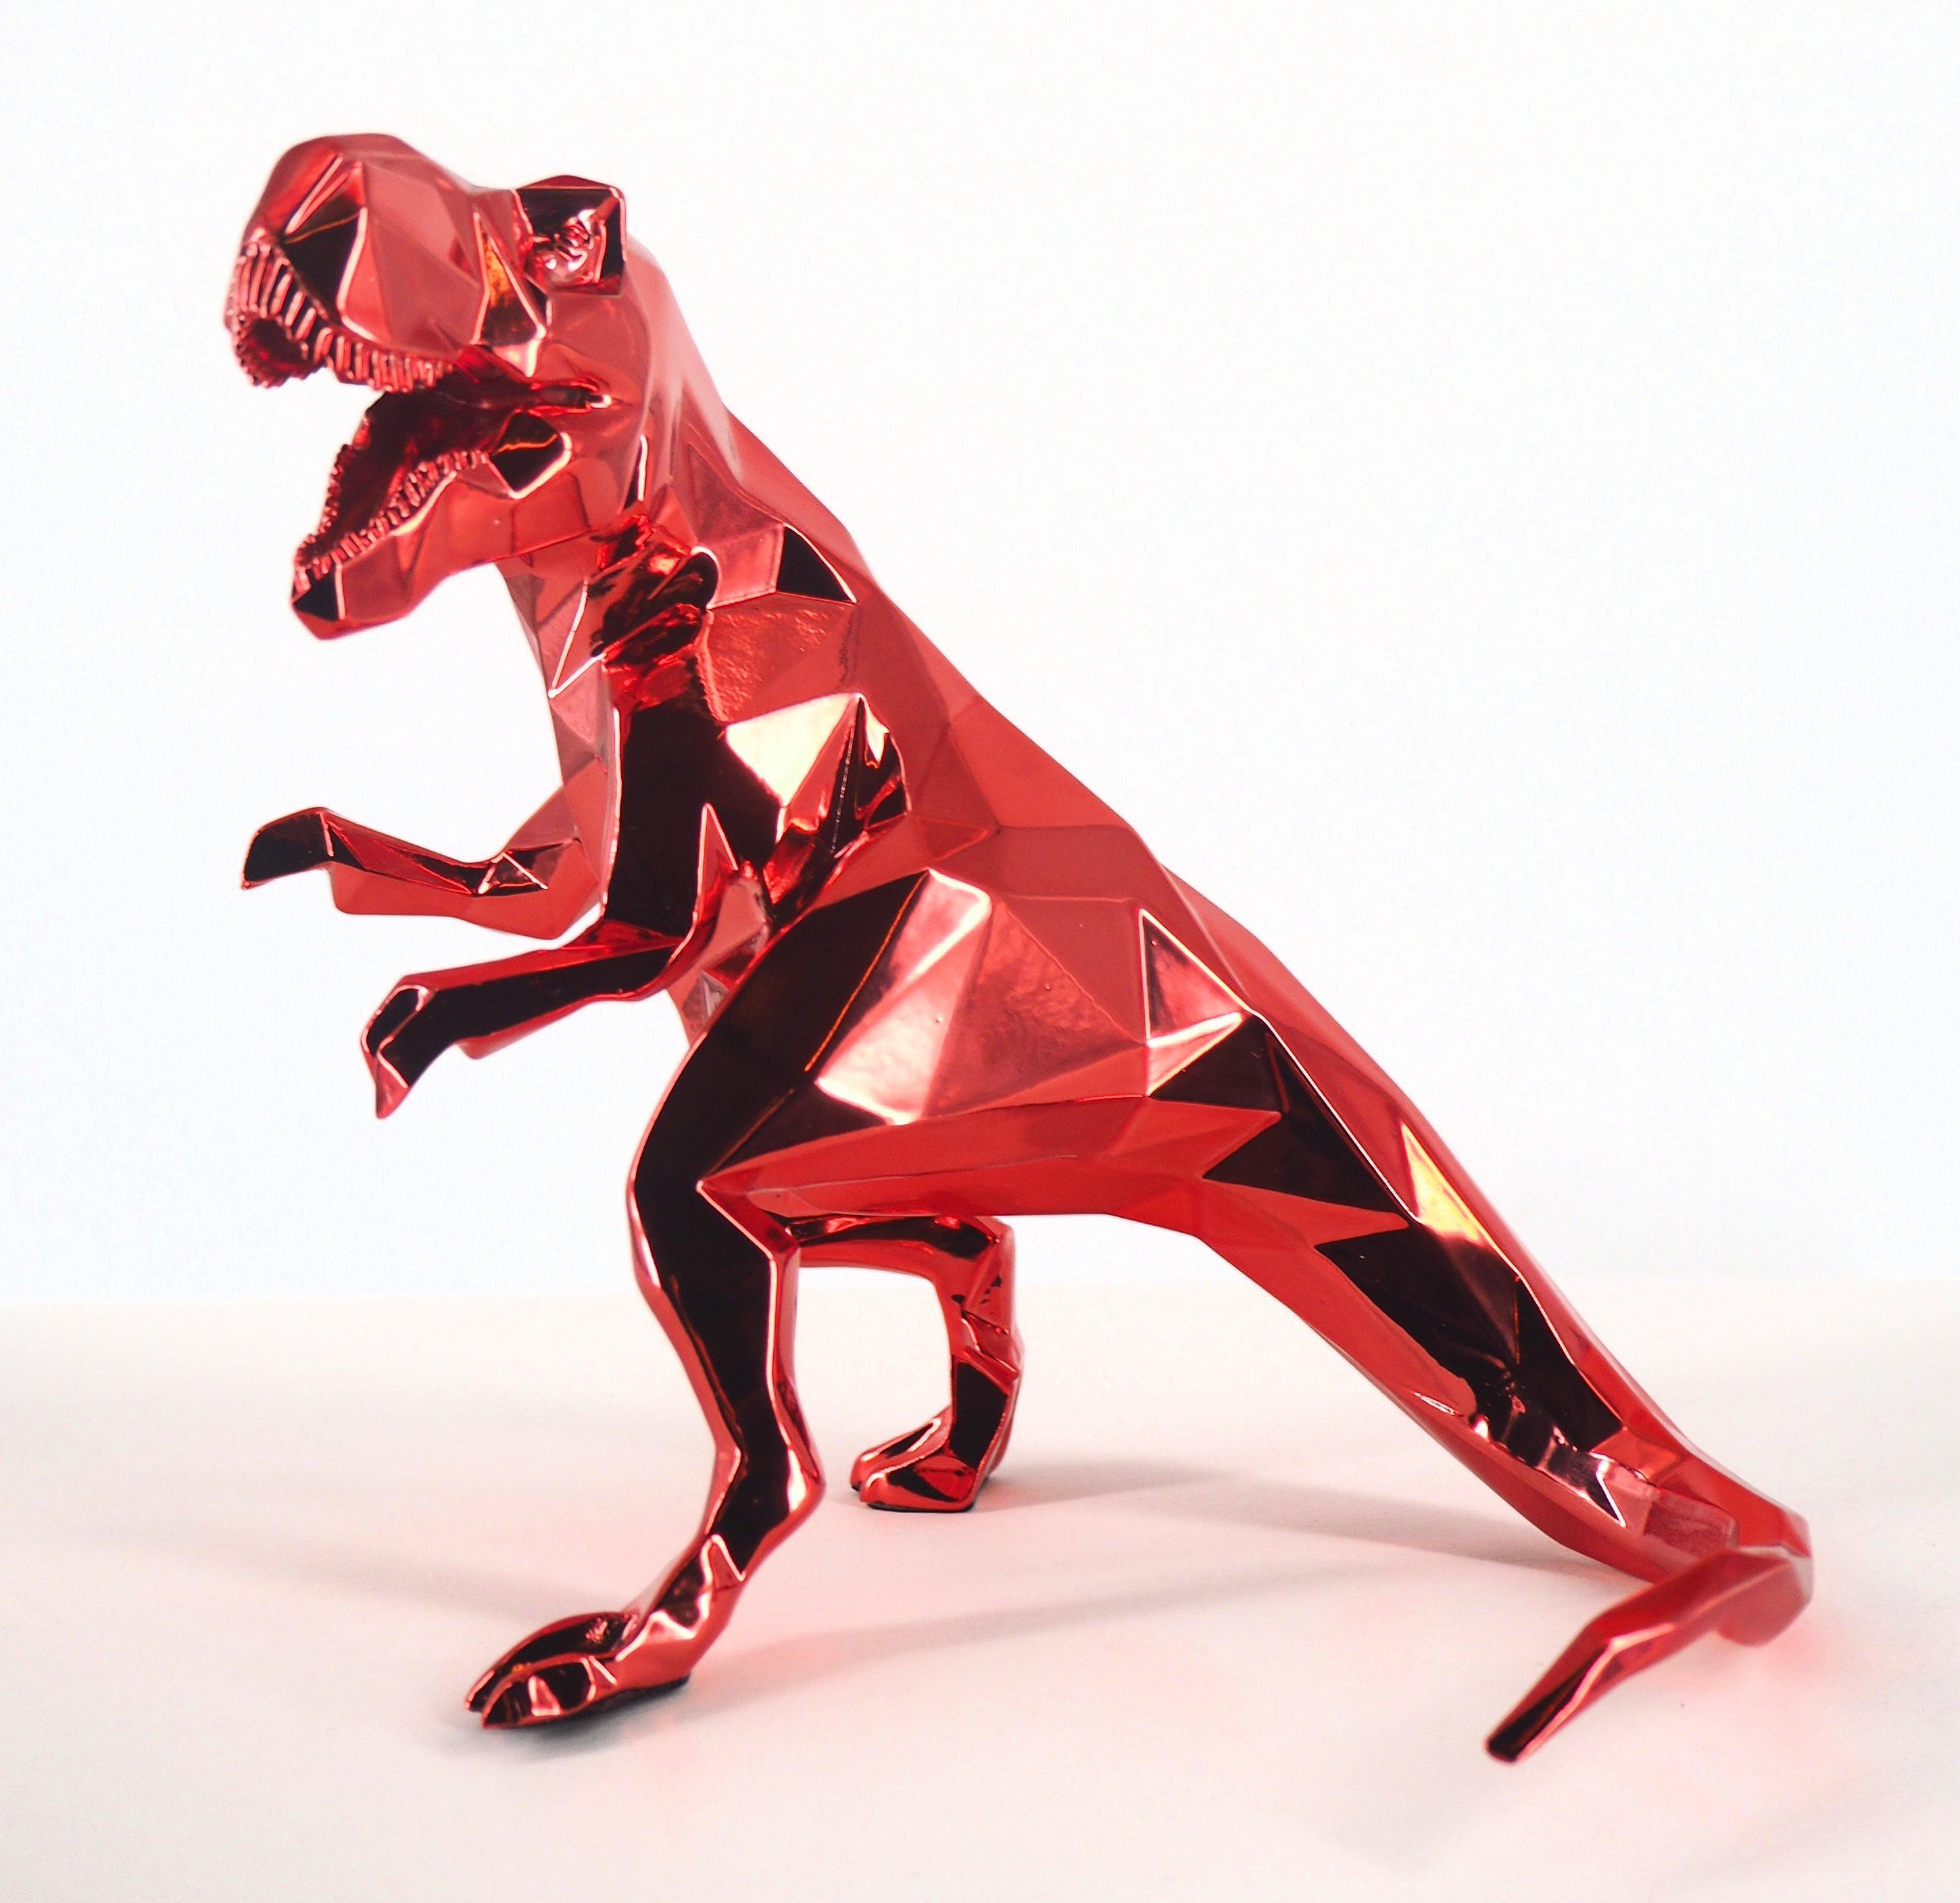 T-Rex (Red Edition) - Sculpture in original box with artist certificate For Sale 4